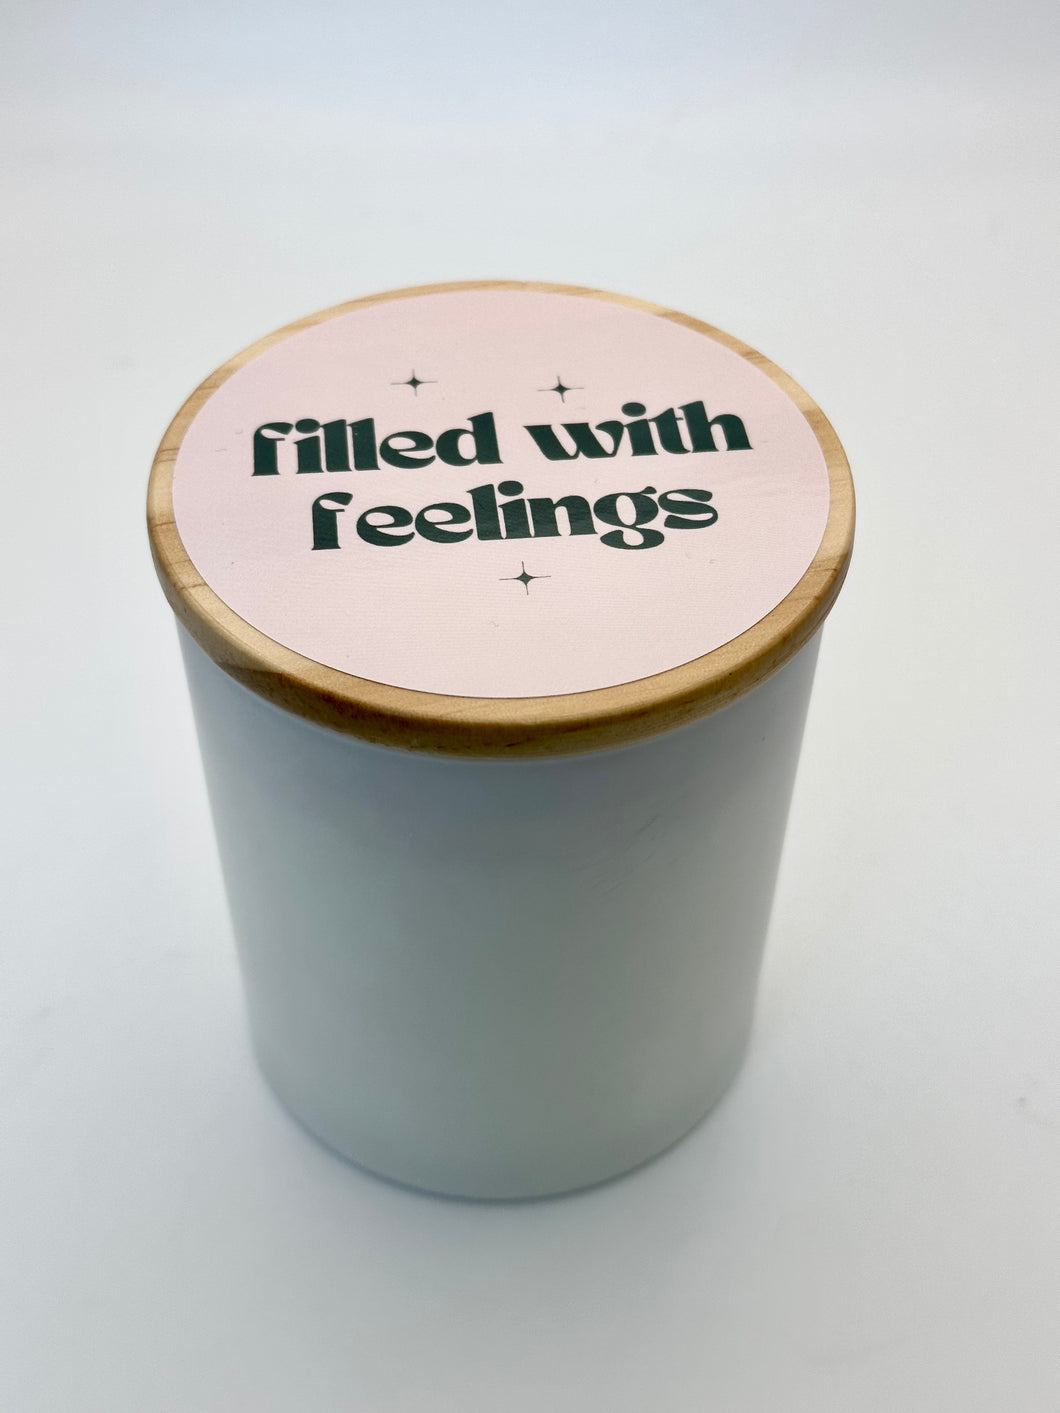 Salt + Clay x If Lost Start Here Collab ~ The Filled With Feelings Candle ~ Natural Coconut Wax + Essential Oils ~ 10oz